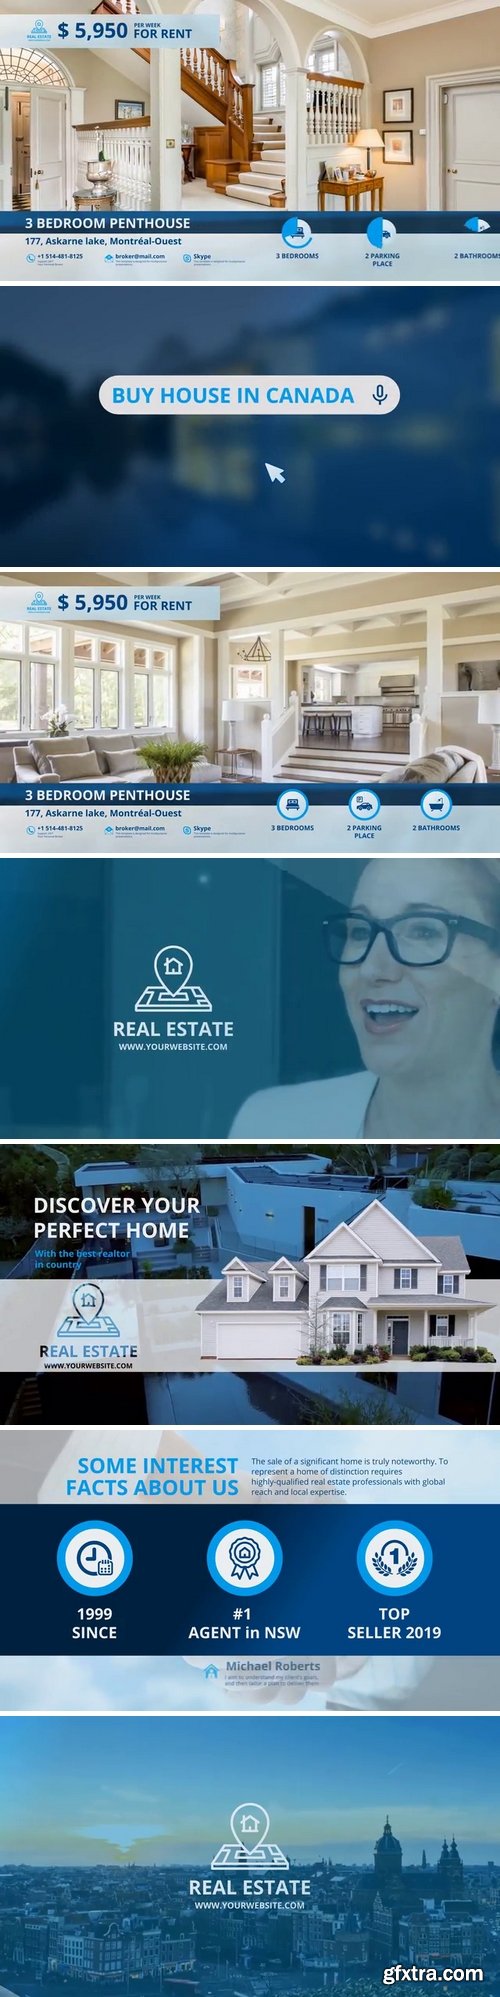 MotionArray Real Estate Motion After Effects Templates 158090 » GFxtra